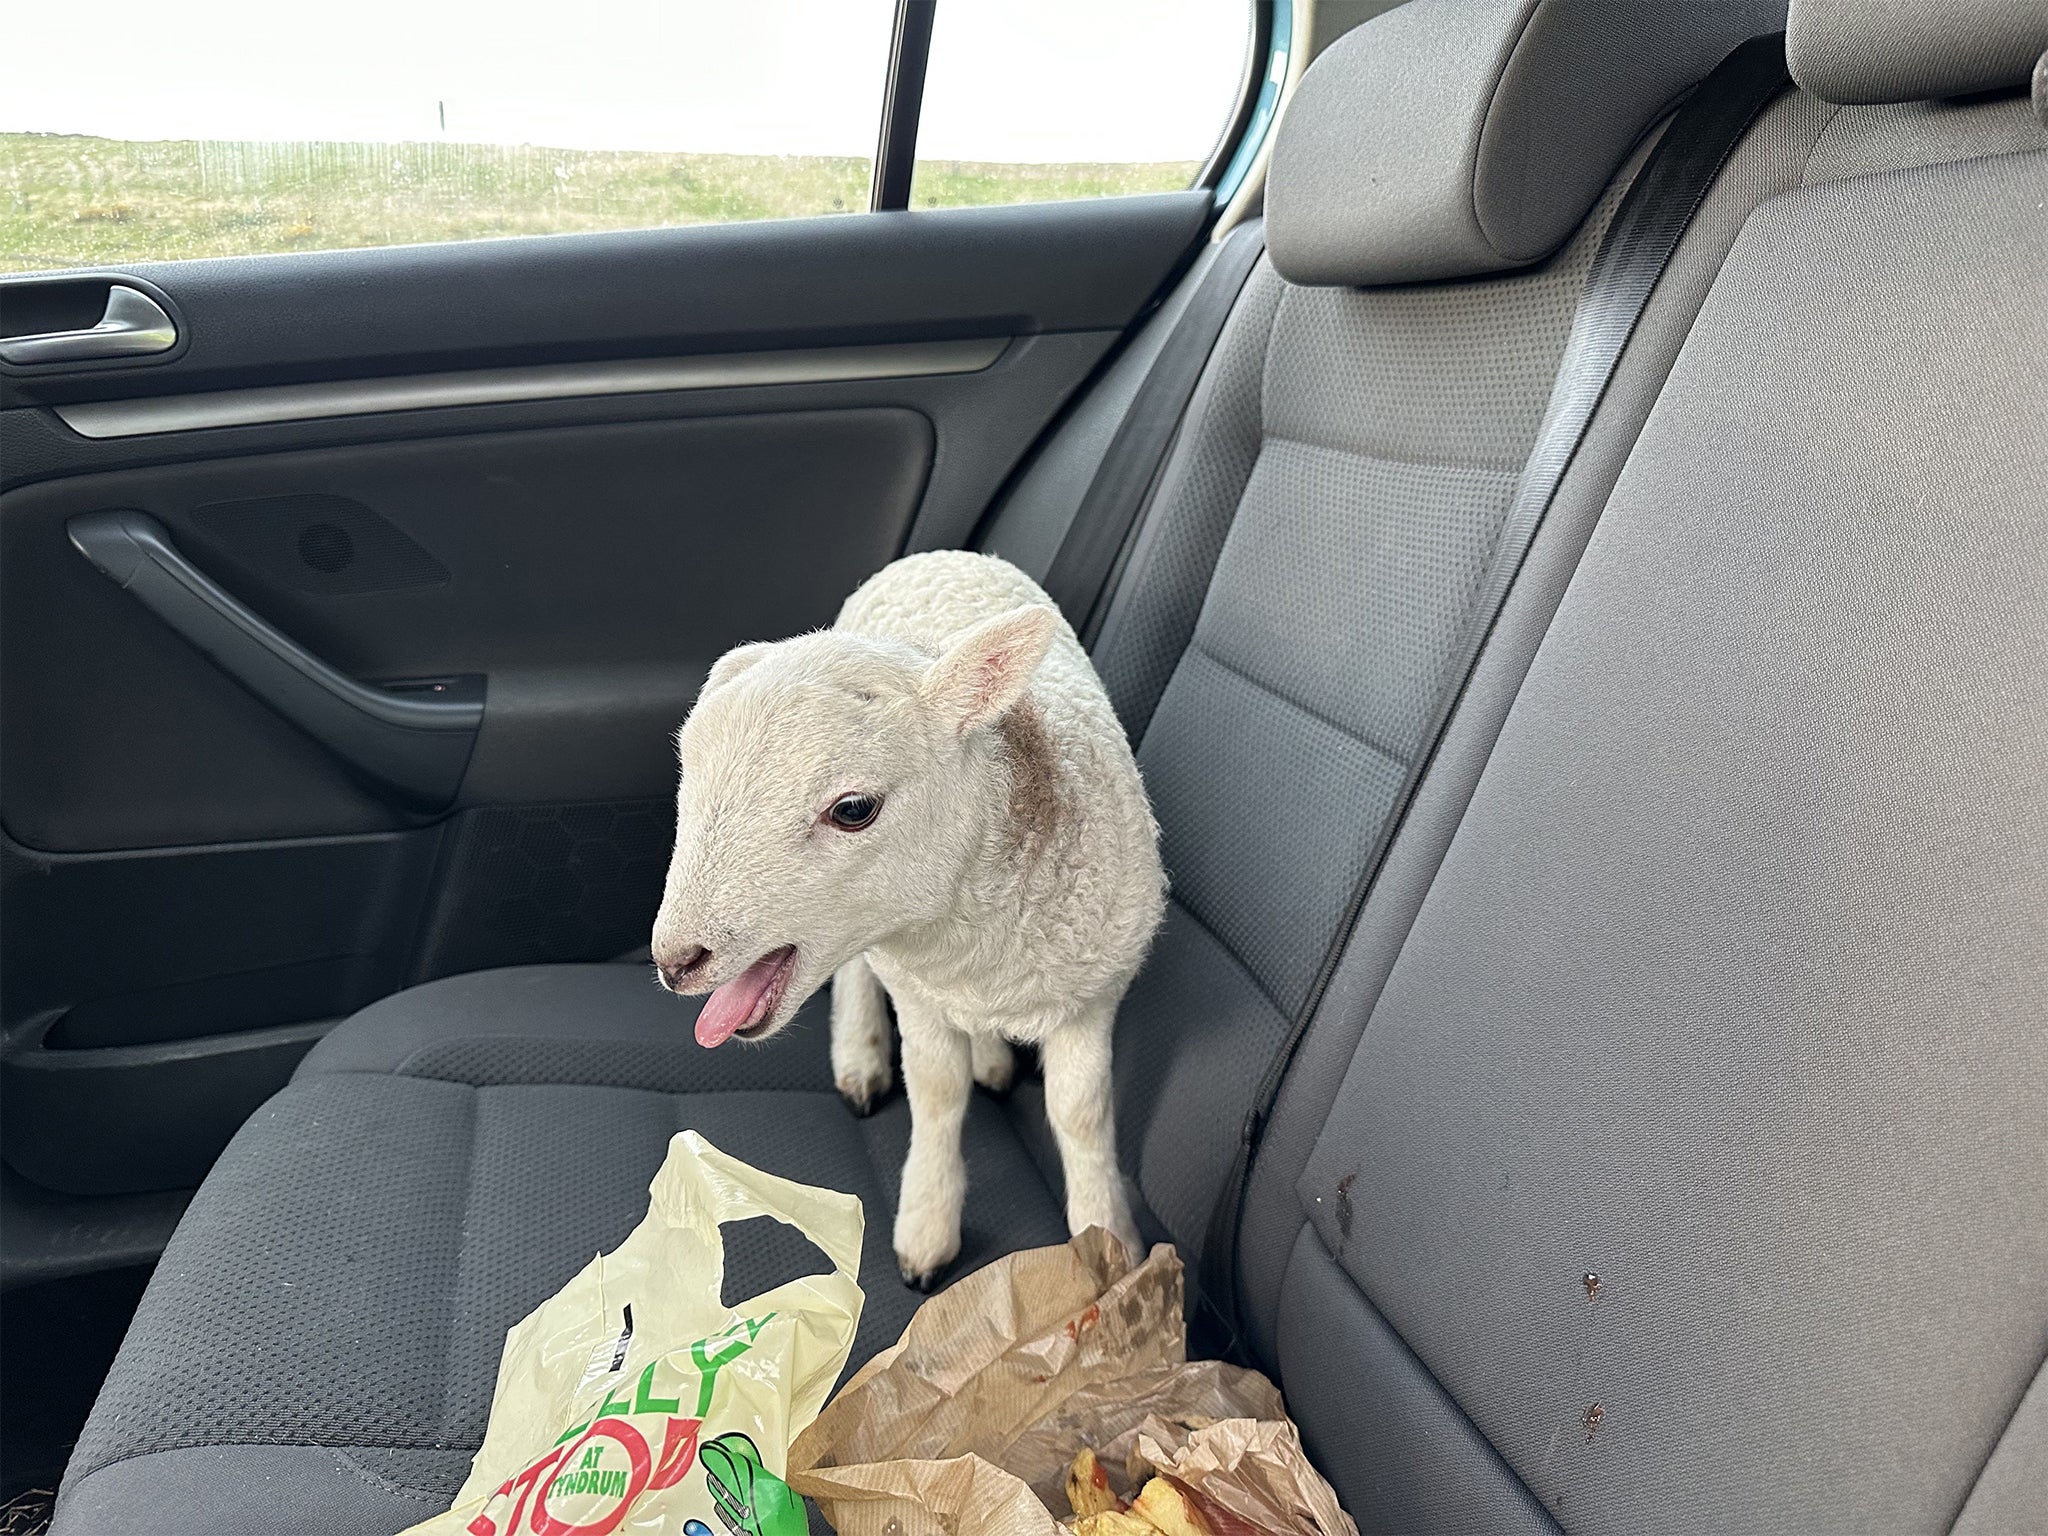 Lamb found in back of pulled over vehicle has been returned to its owner